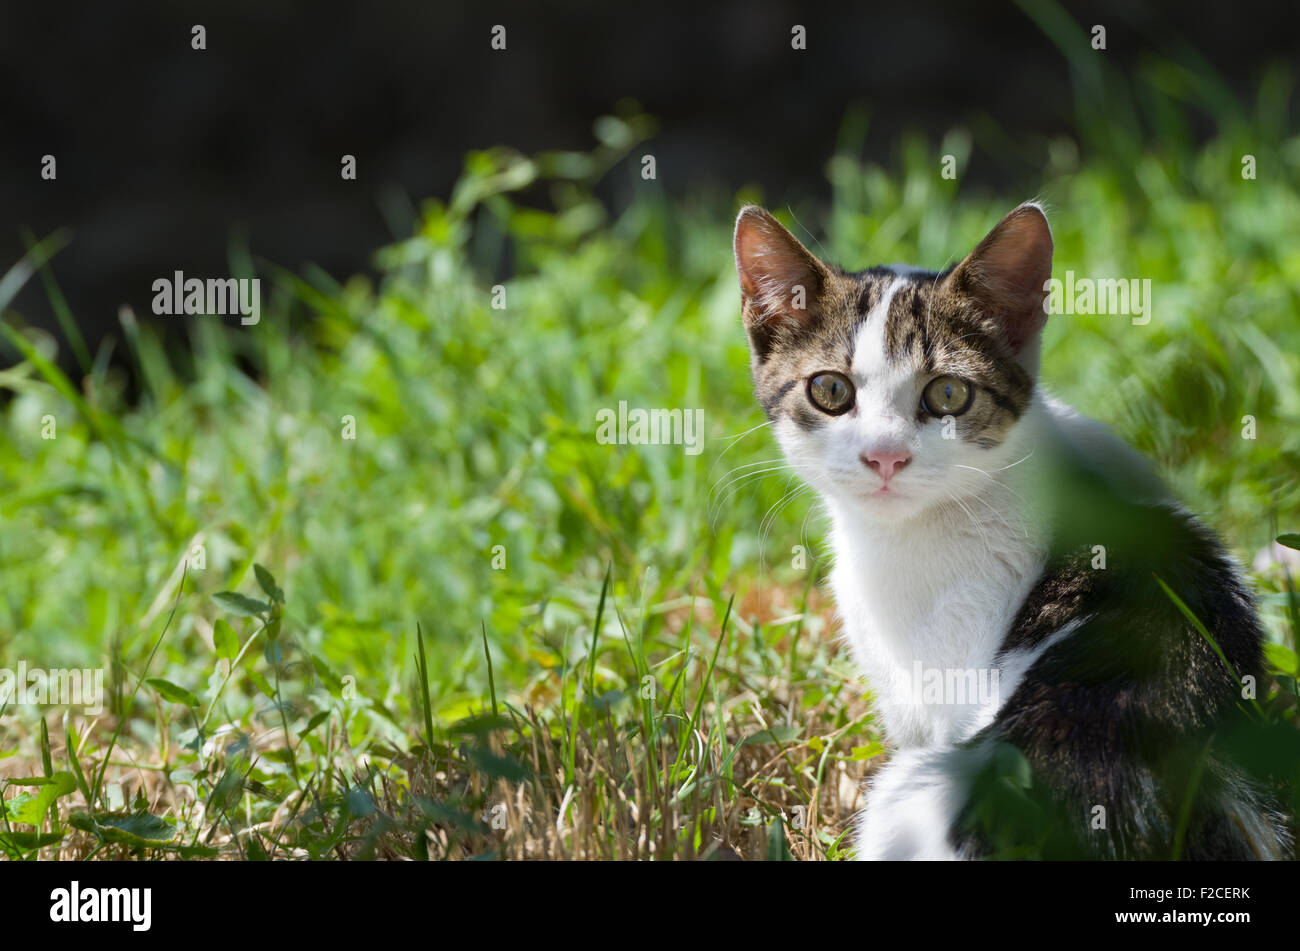 Multicolored Dun Young Kitten Cat Watching in Green Grass at Midday Stock Photo